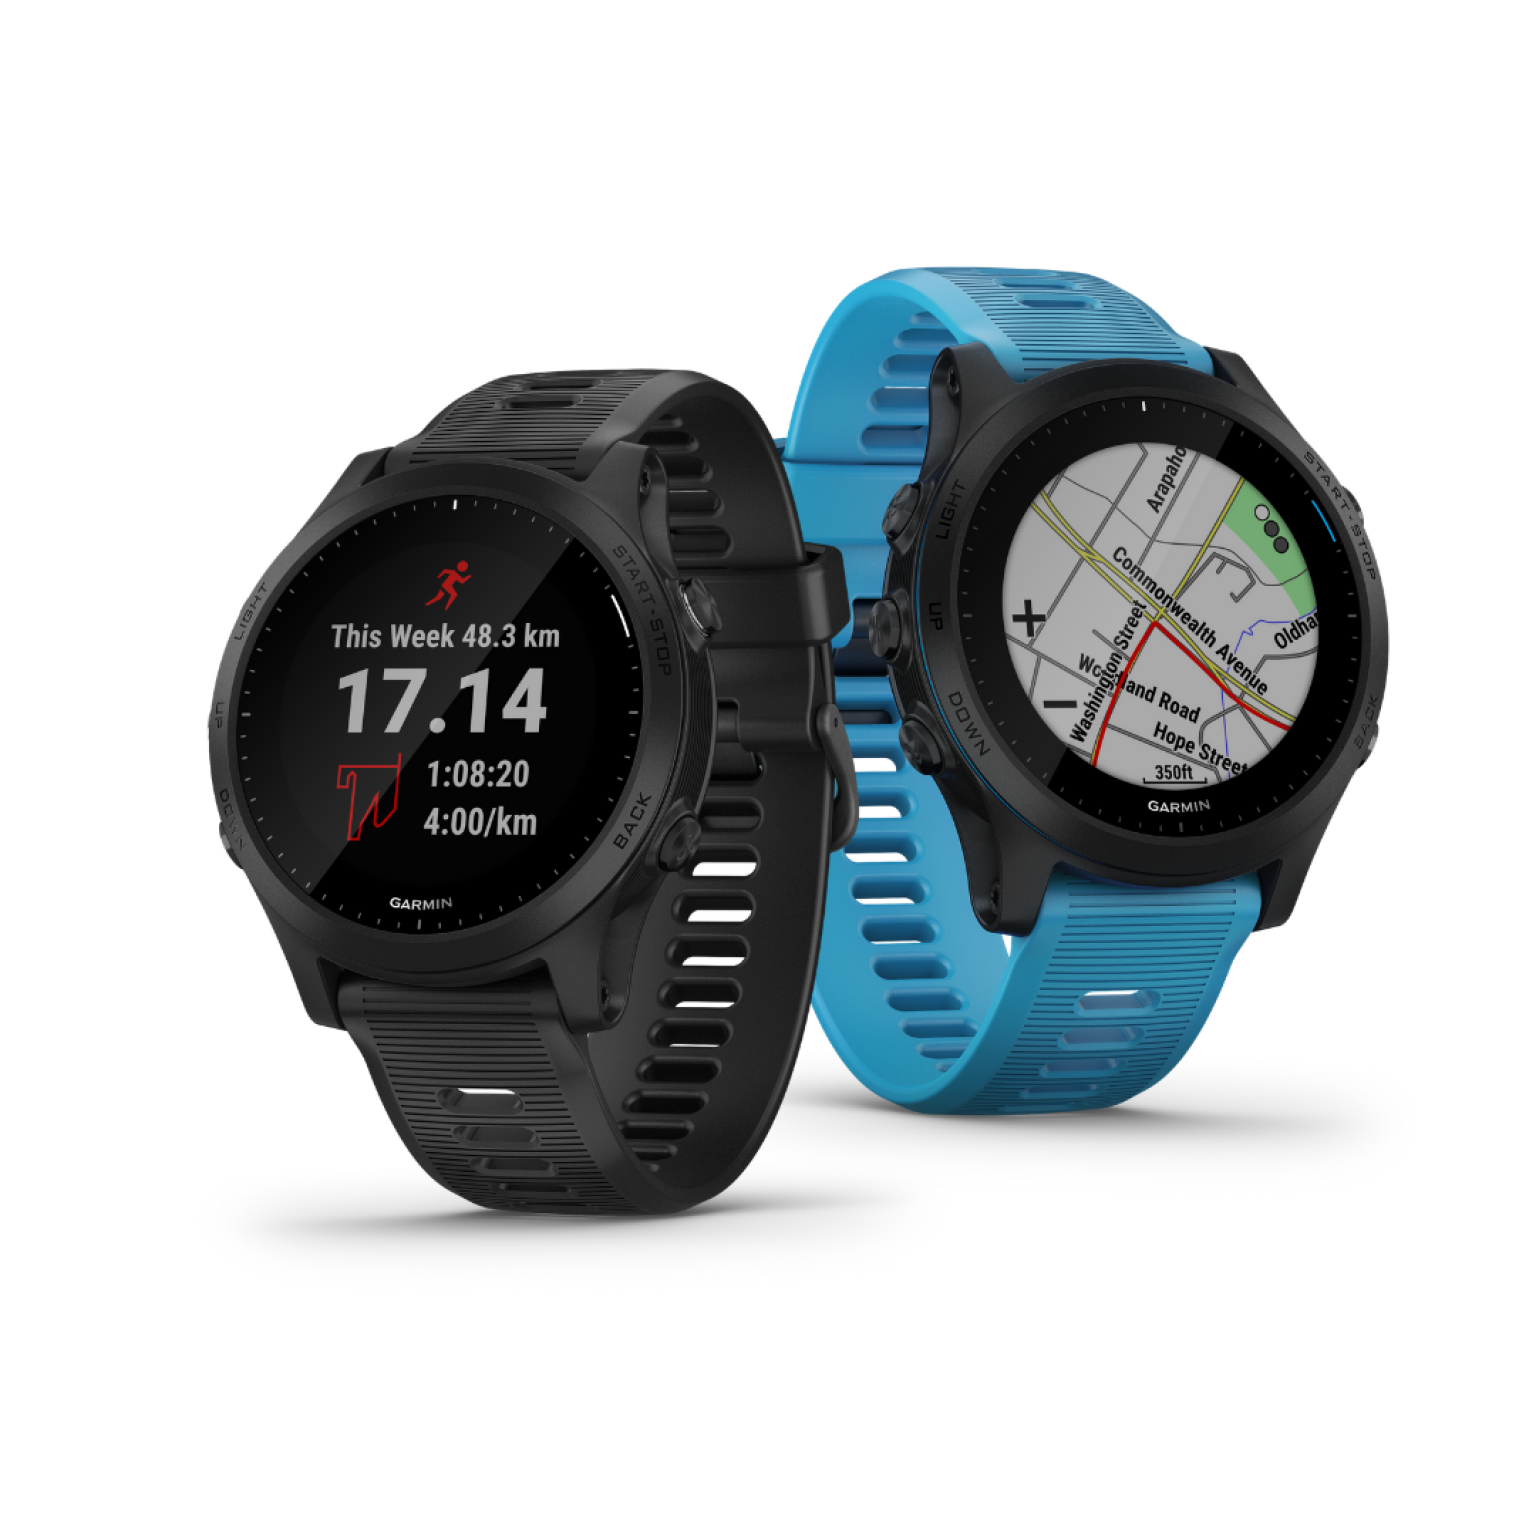 garmin-you-can-now-trade-in-your-watch-for-up-to-rm-300-rebate-the-axo